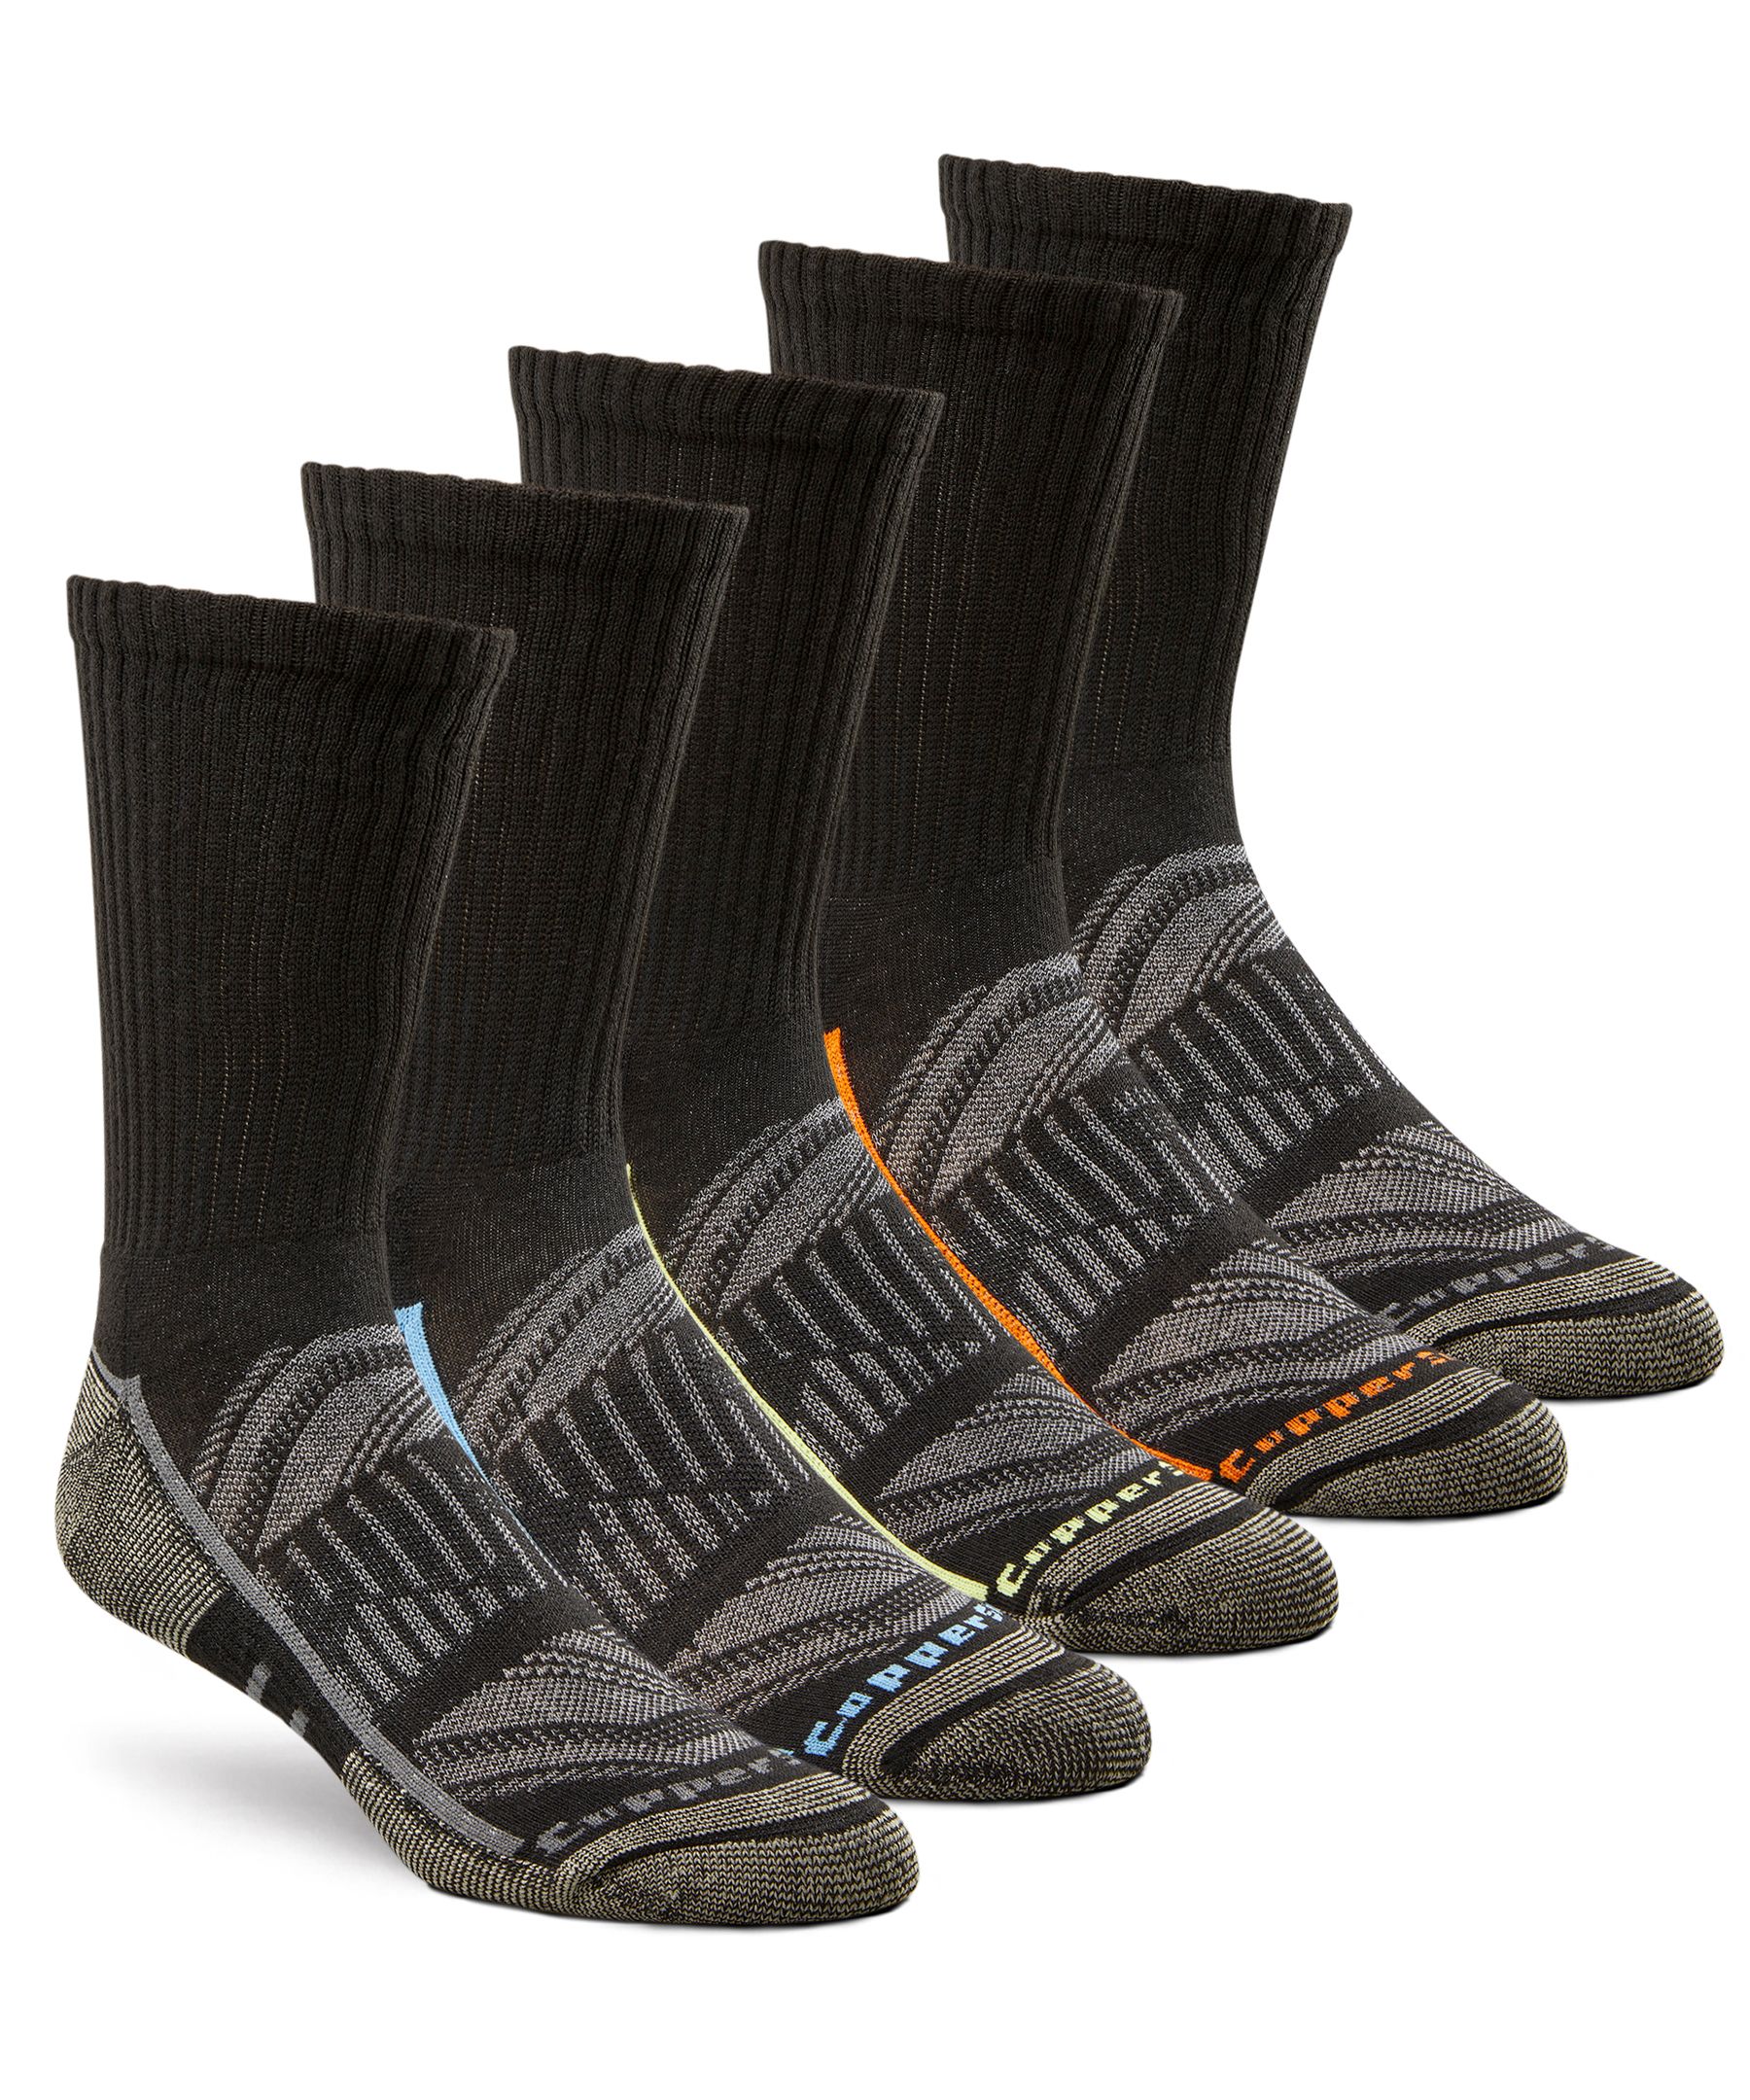 Copper Sole Men's 5 Pack Extreme Athletic Crew Socks with Moisture ...